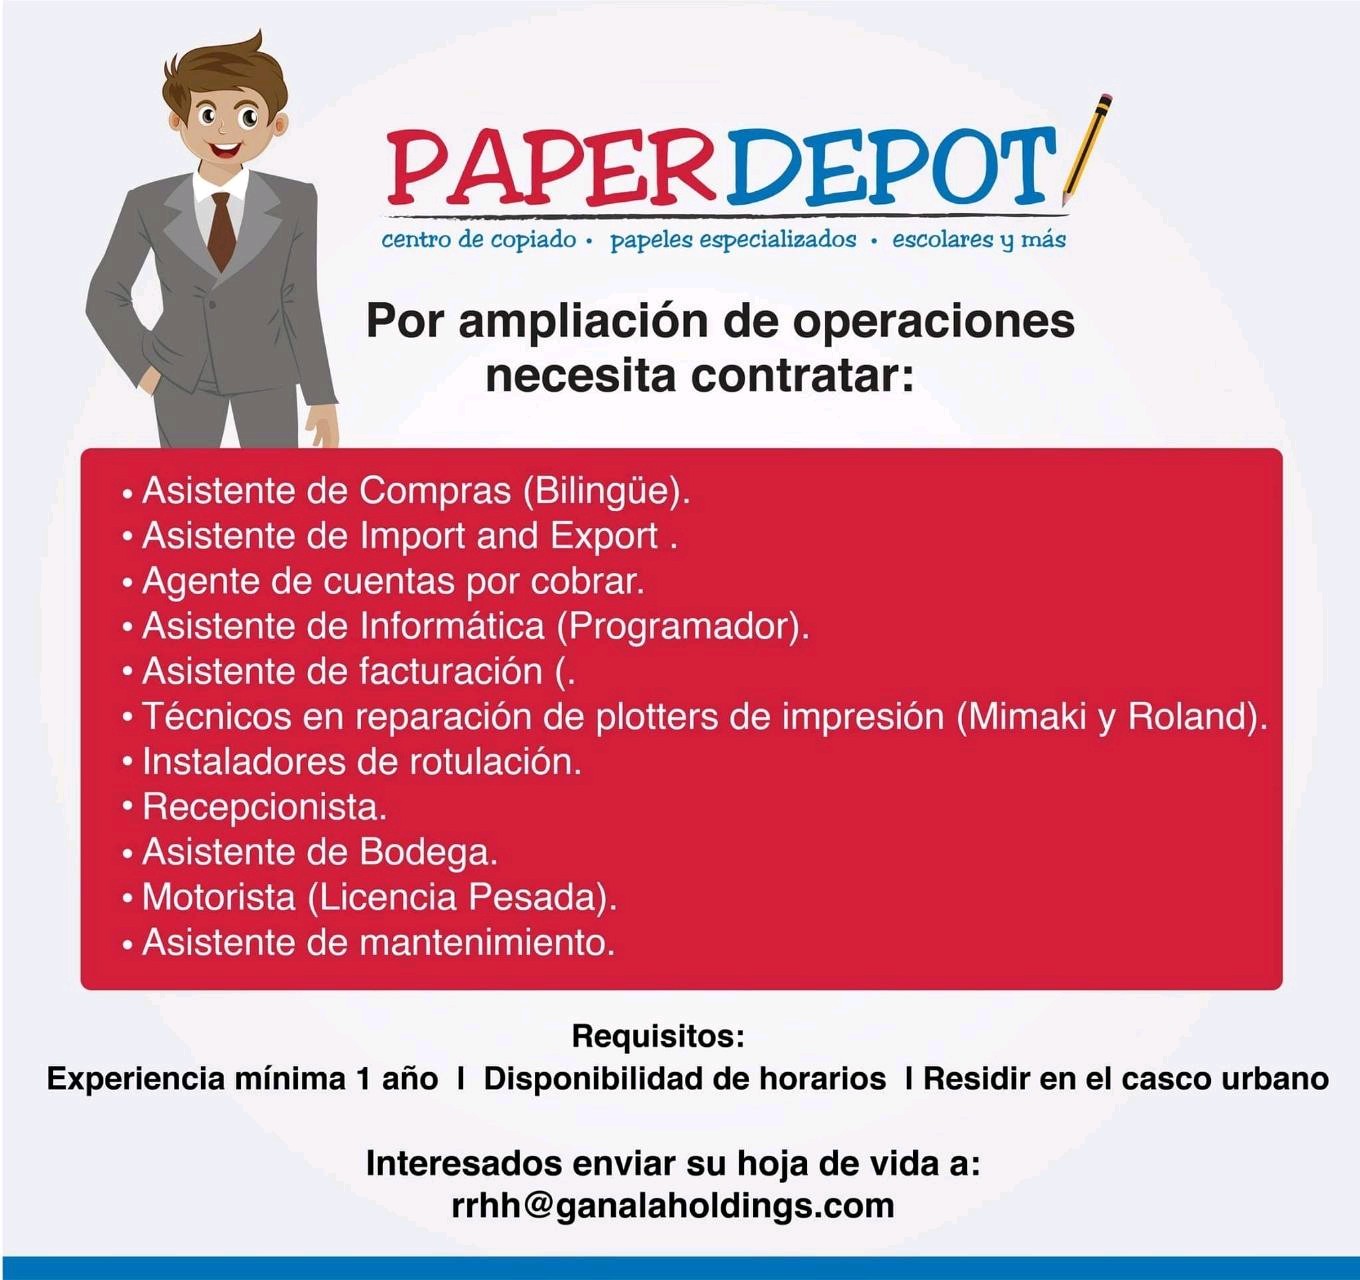 Paper Depot requiere personal - SPS